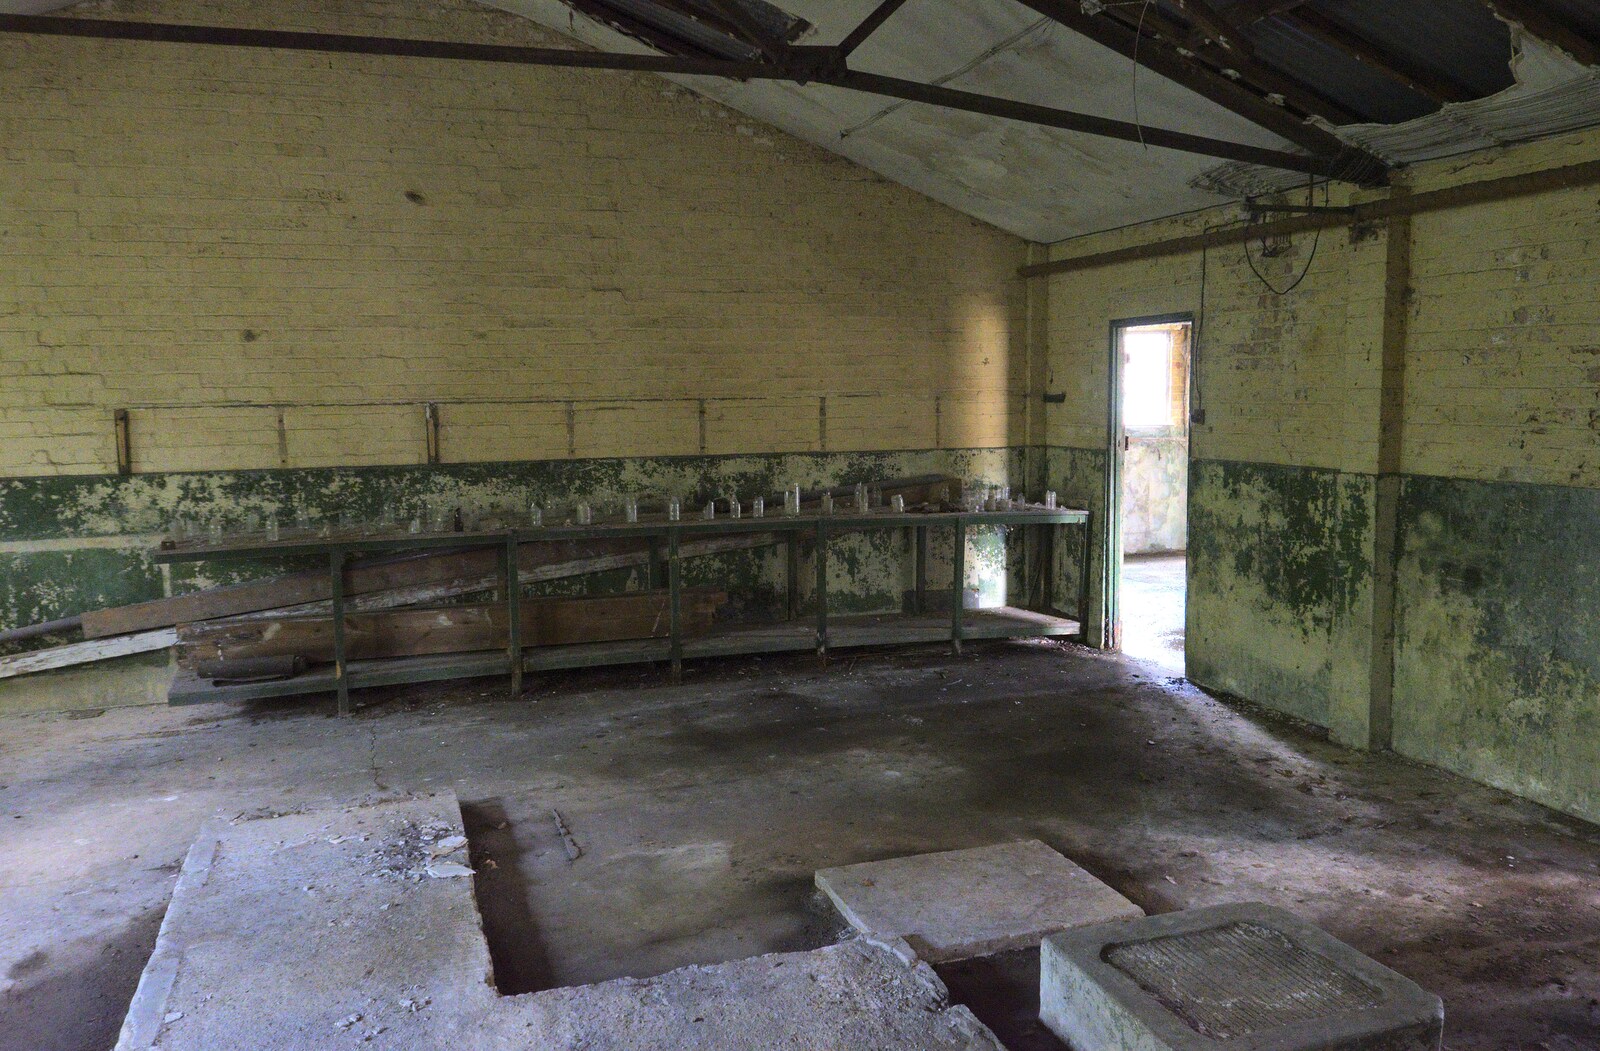 Another corner in another hut from A 1940s Timewarp, Site 4, Bungay Airfield, Flixton, Suffolk - 9th June 2022